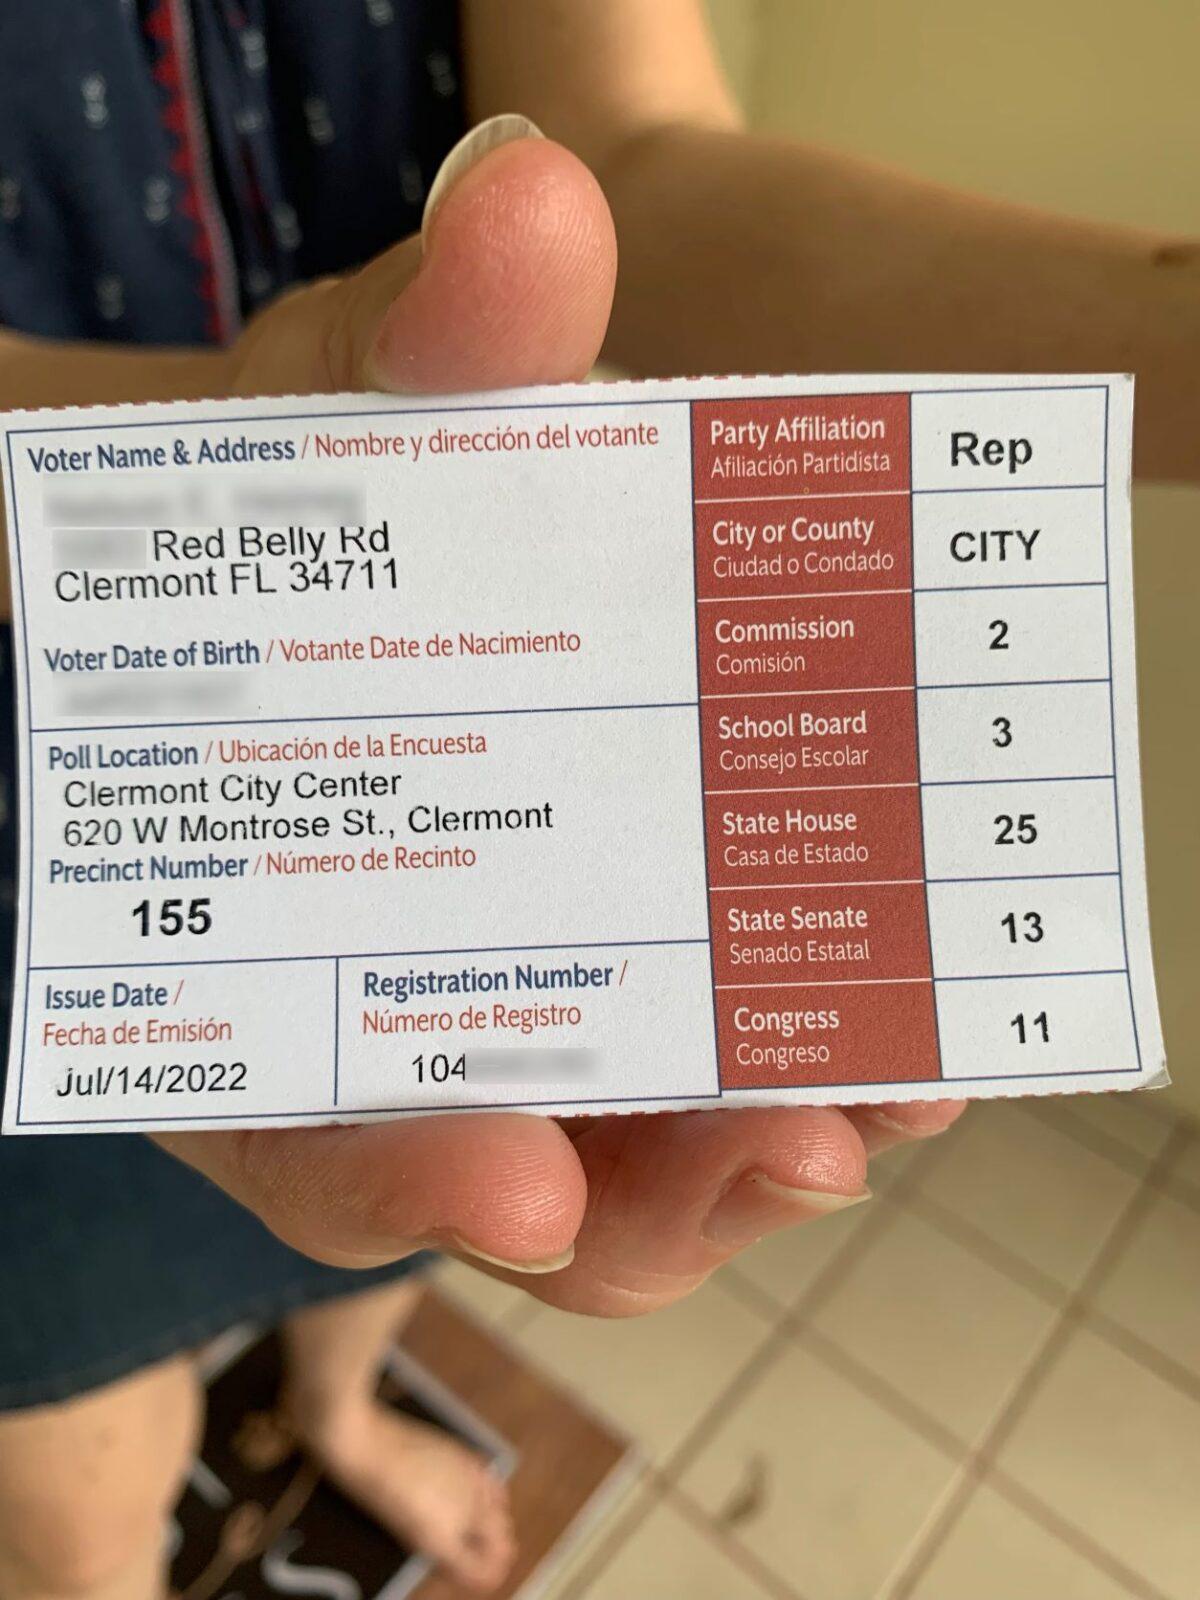 A voter information card issued to a resident of 12th Street in Clermont, Fla. with an inaccurate Red Belly Road address. (Courtesy of Kris Jurski)